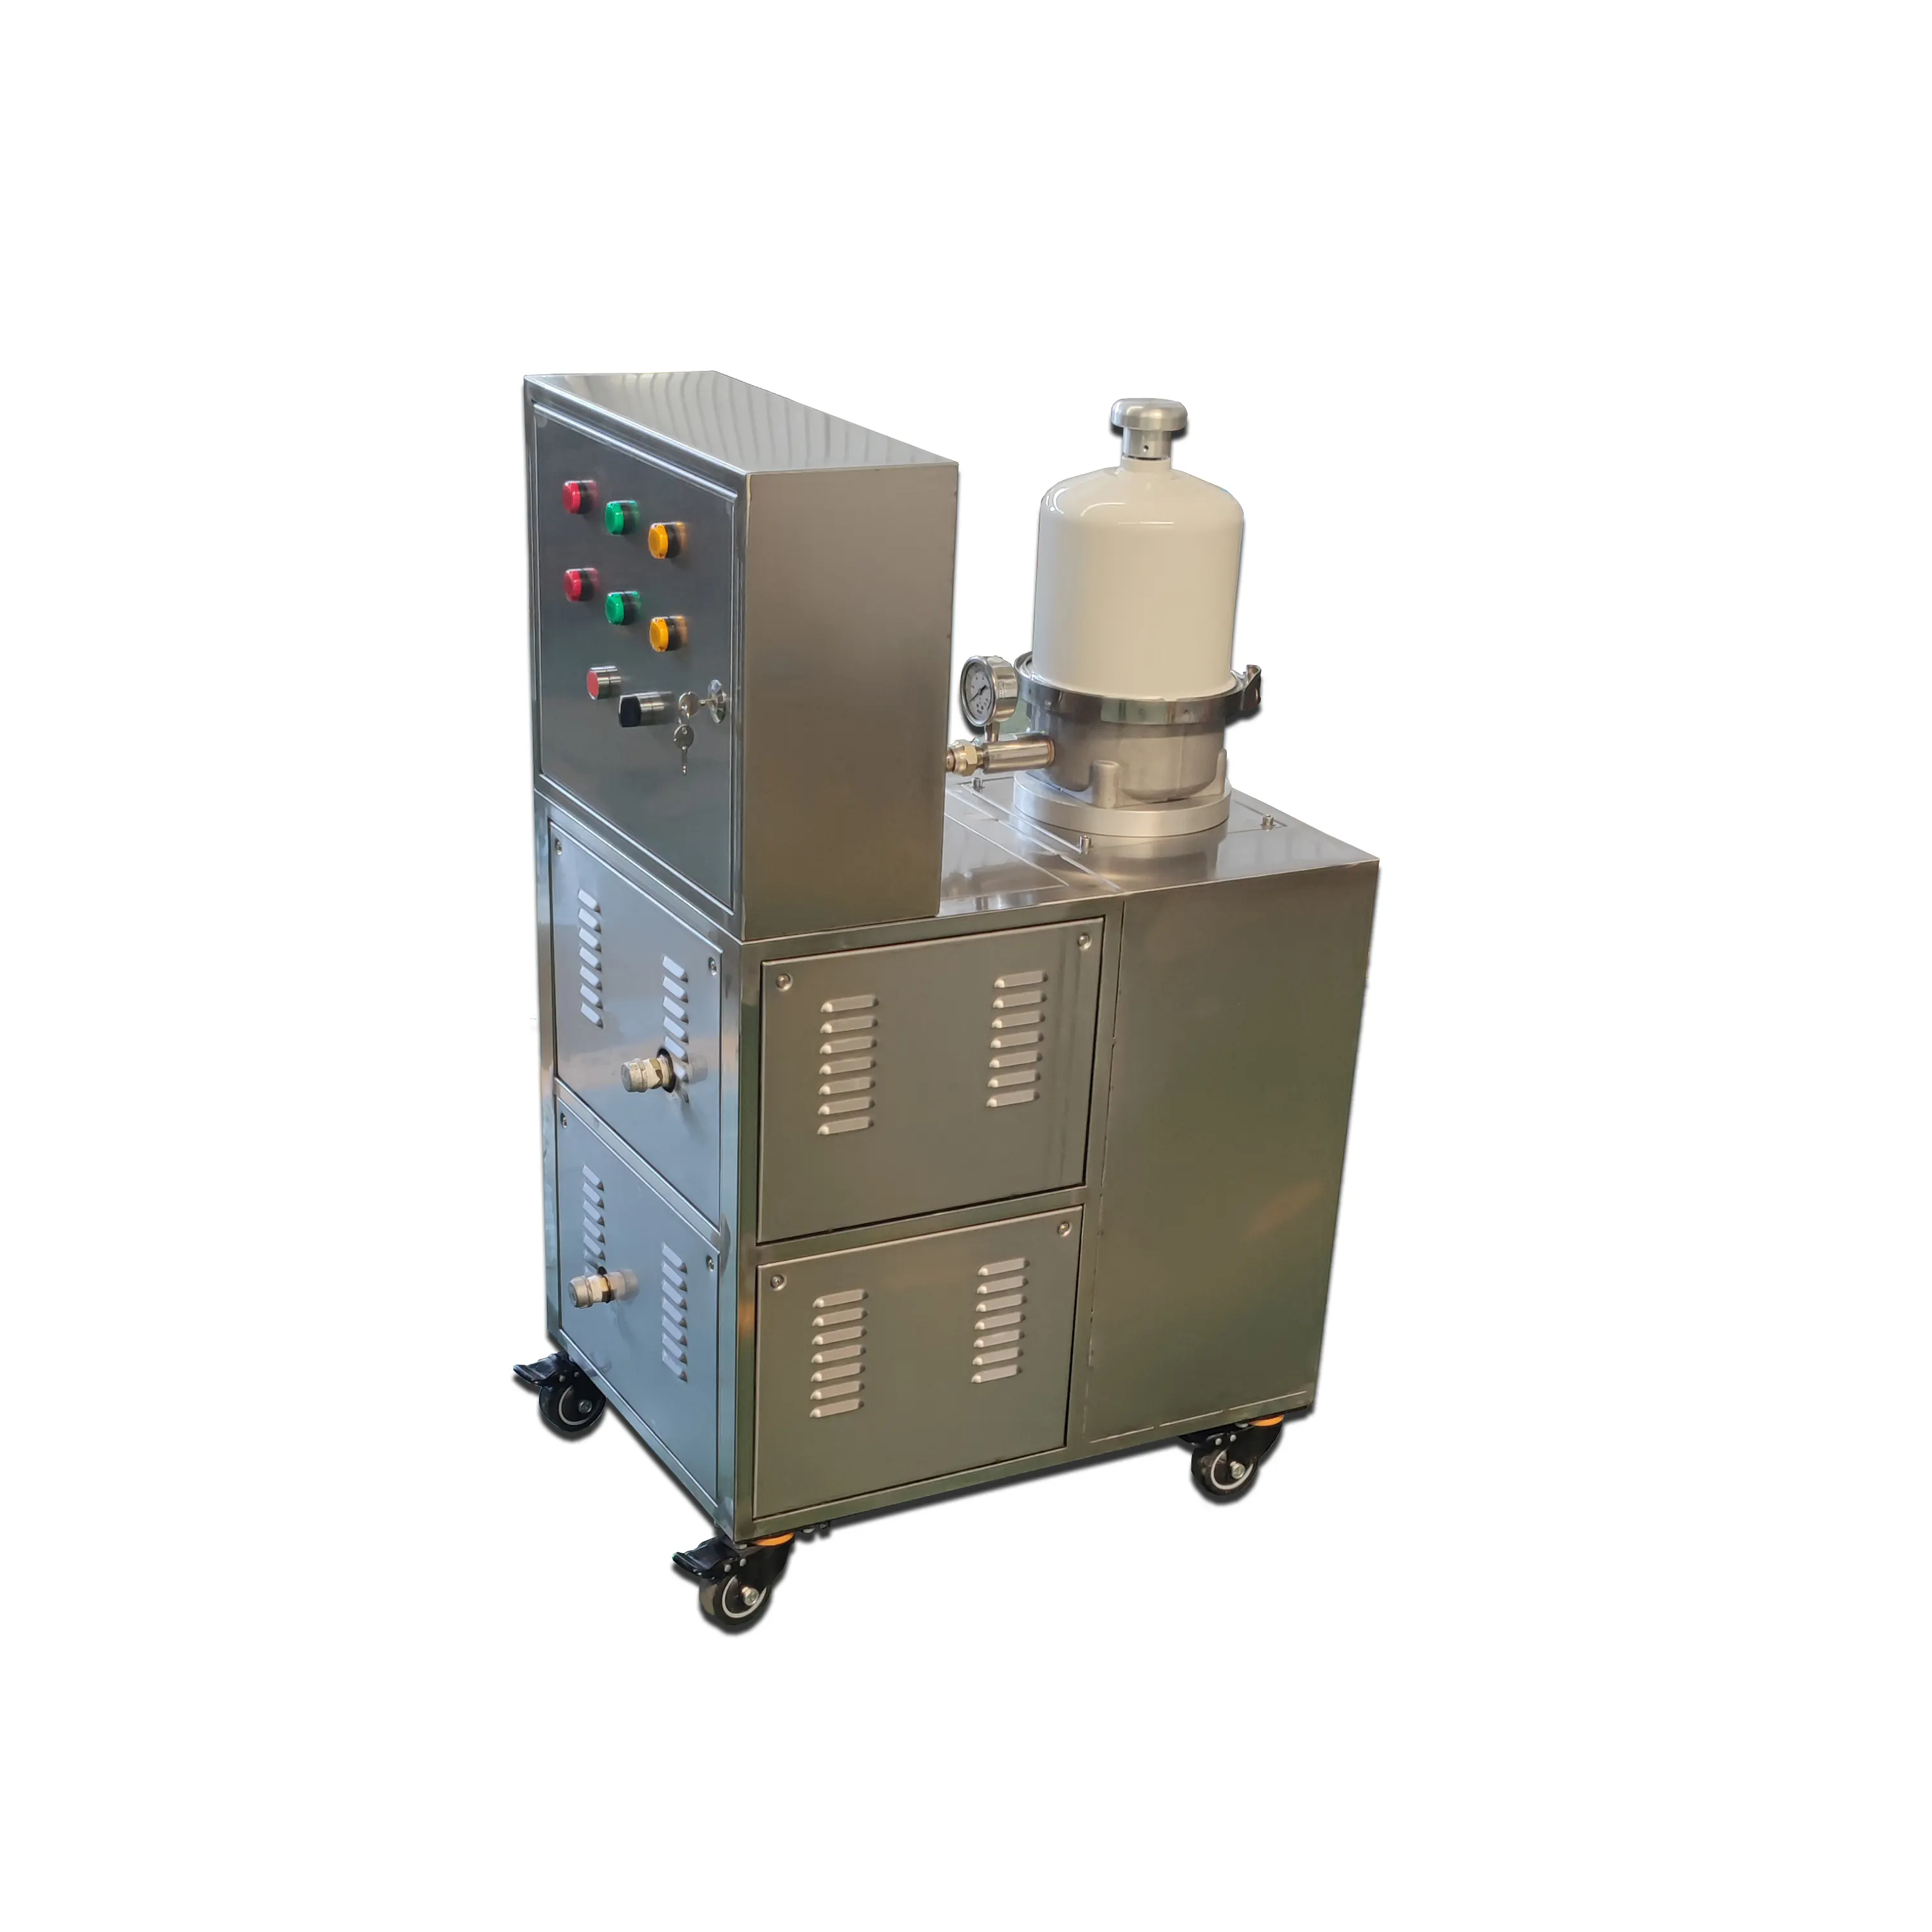 Oil filtration machine for the gear oil